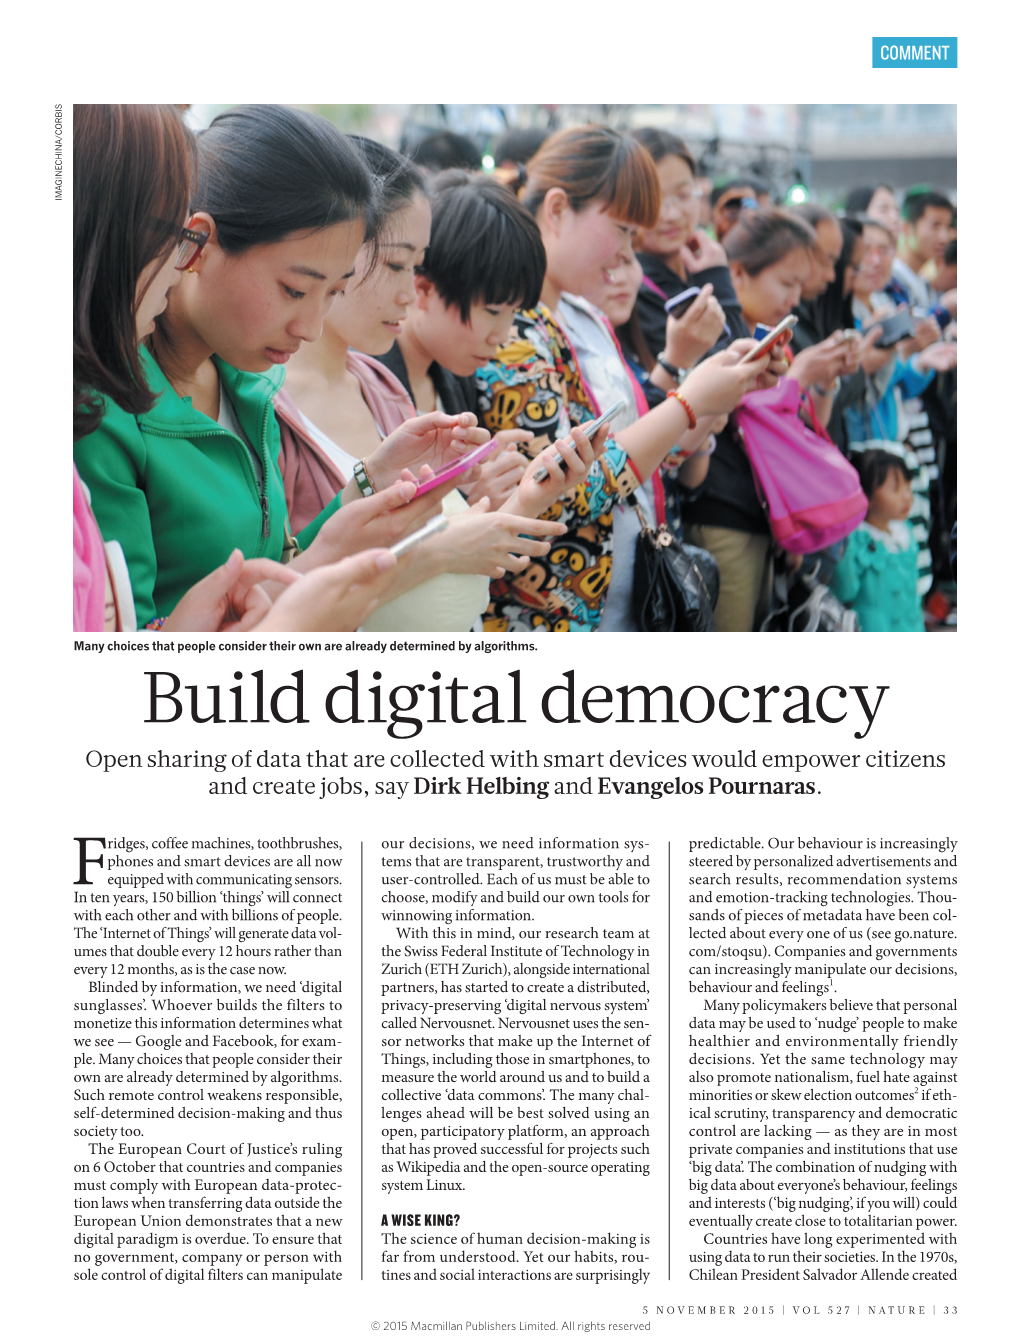 Build Digital Democracy Open Sharing of Data That Are Collected with Smart Devices Would Empower Citizens and Create Jobs, Say Dirk Helbing and Evangelos Pournaras